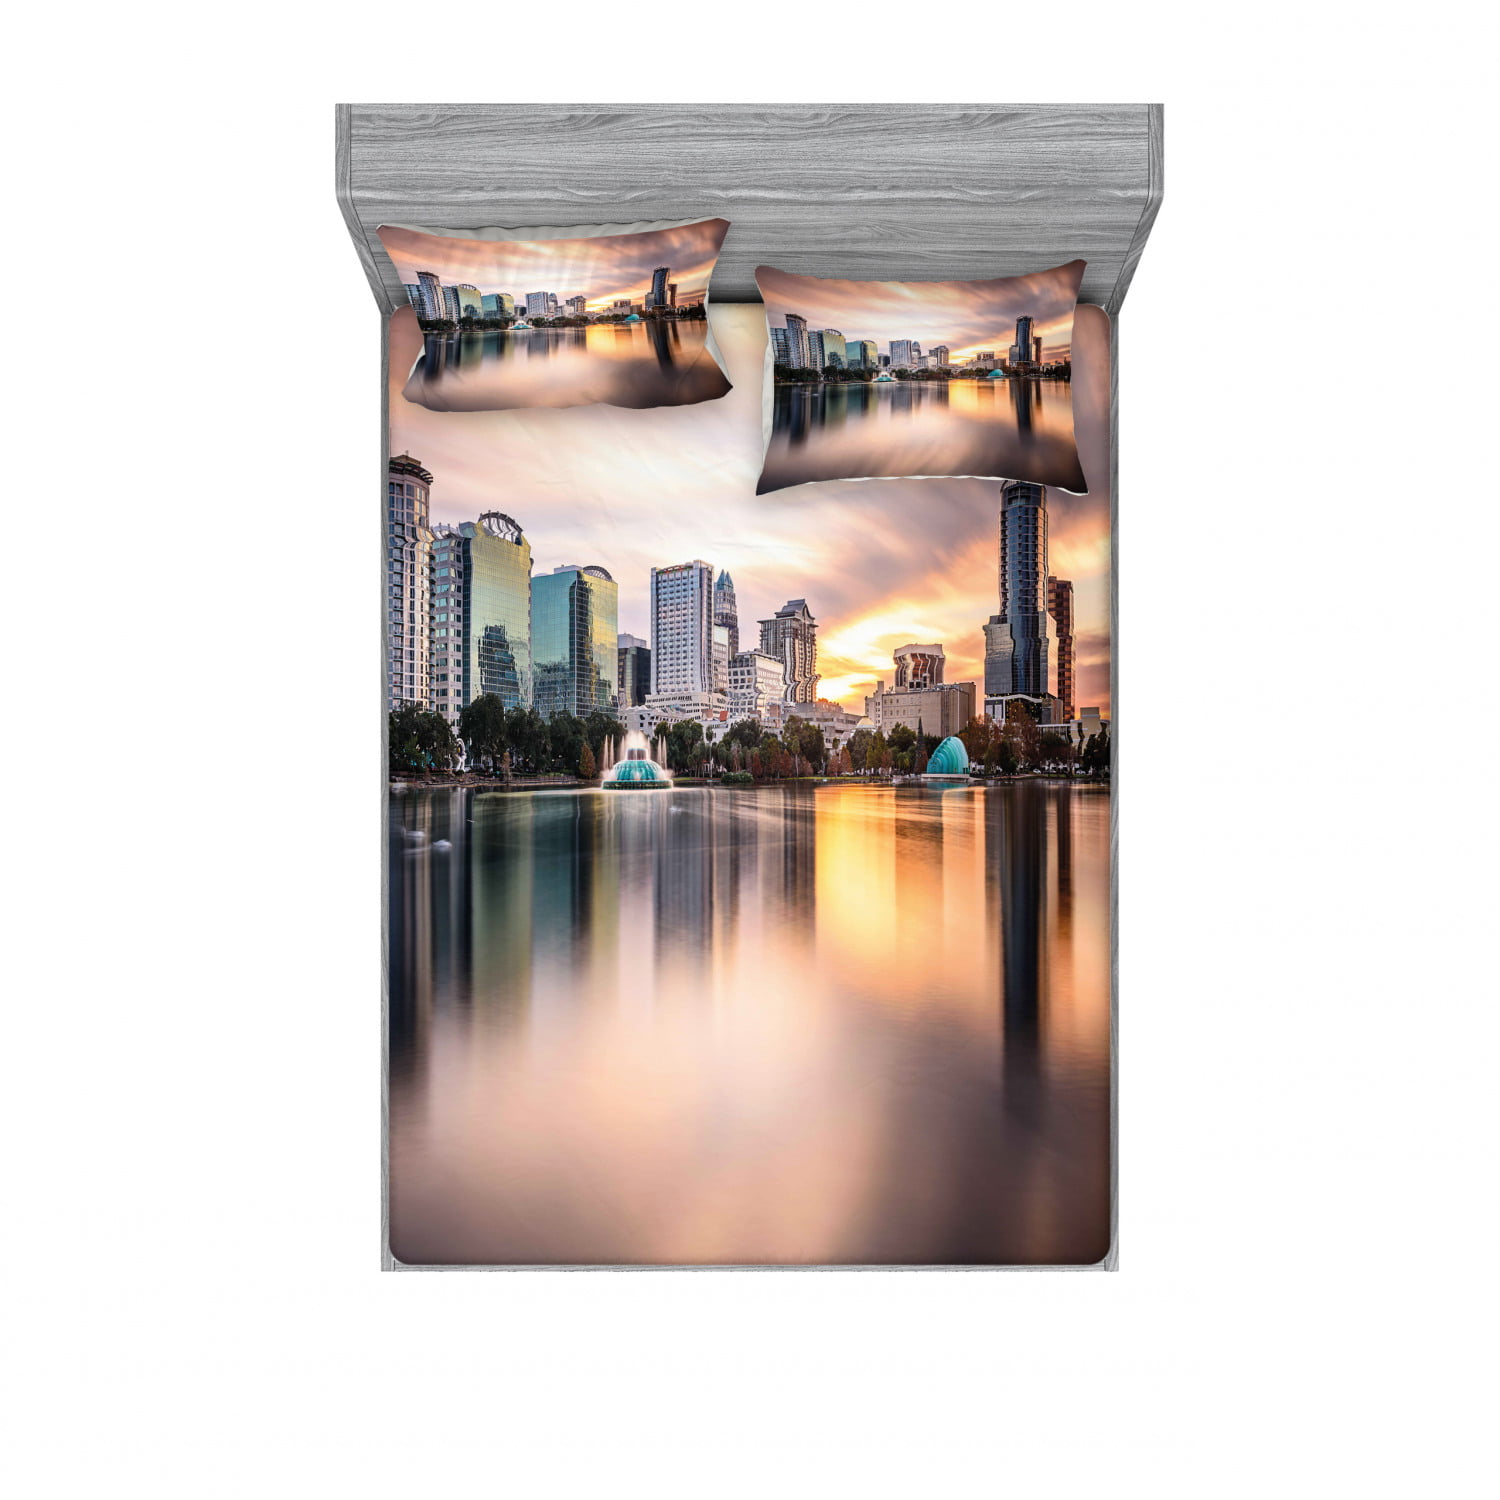 50 x 60 Pale Blue Orange Cozy Plush for Indoor and Outdoor Use Ambesonne Landscape Soft Flannel Fleece Throw Blanket New York City Skyline USA Landmark Buildings Skyscrapers Modern Urban Life 